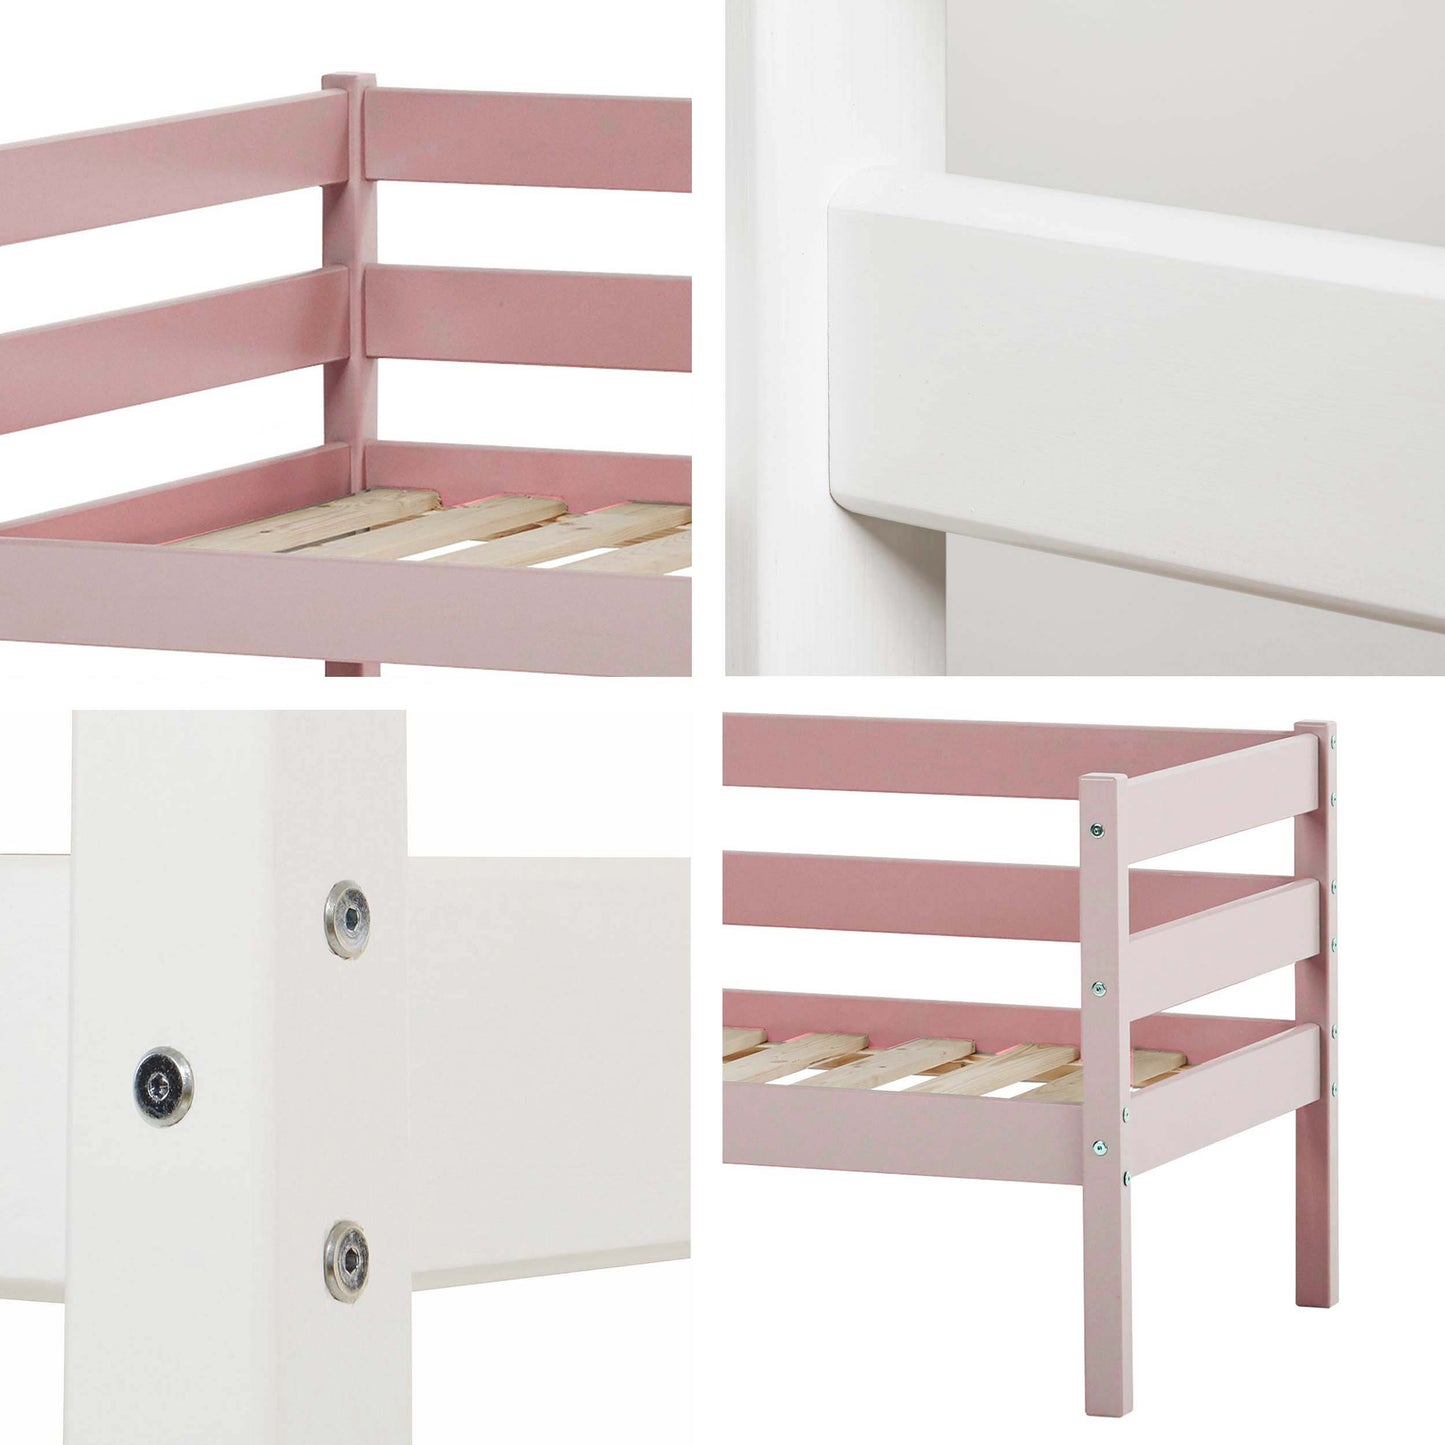 ECO Comfort junior bed with safety rail